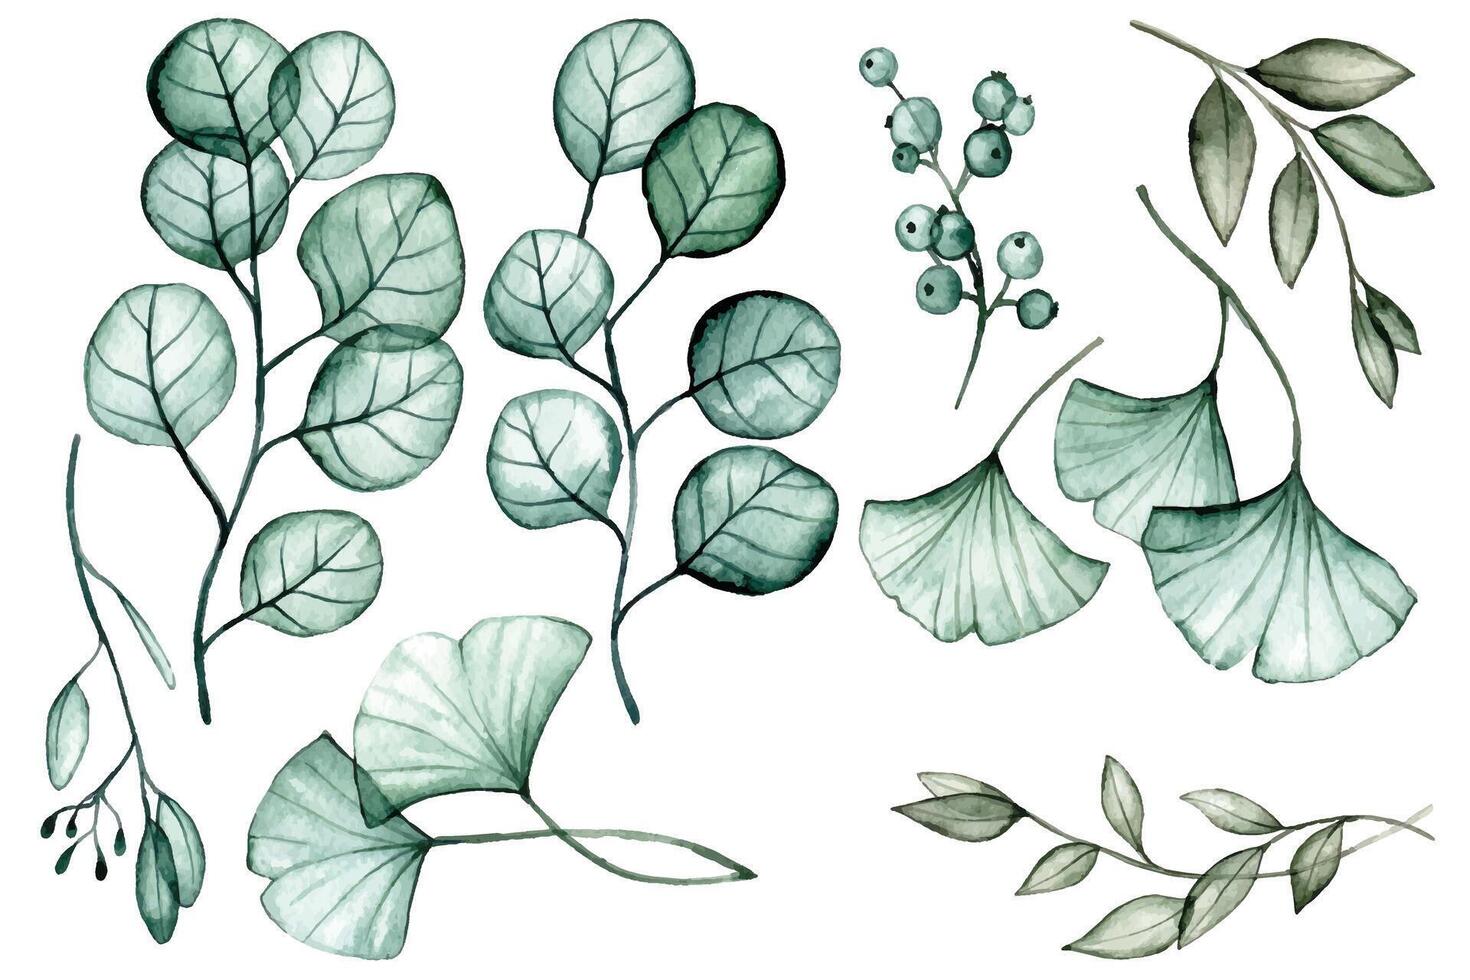 watercolor drawing. set of transparent eucalyptus and ginkgo leaves. x-ray vector